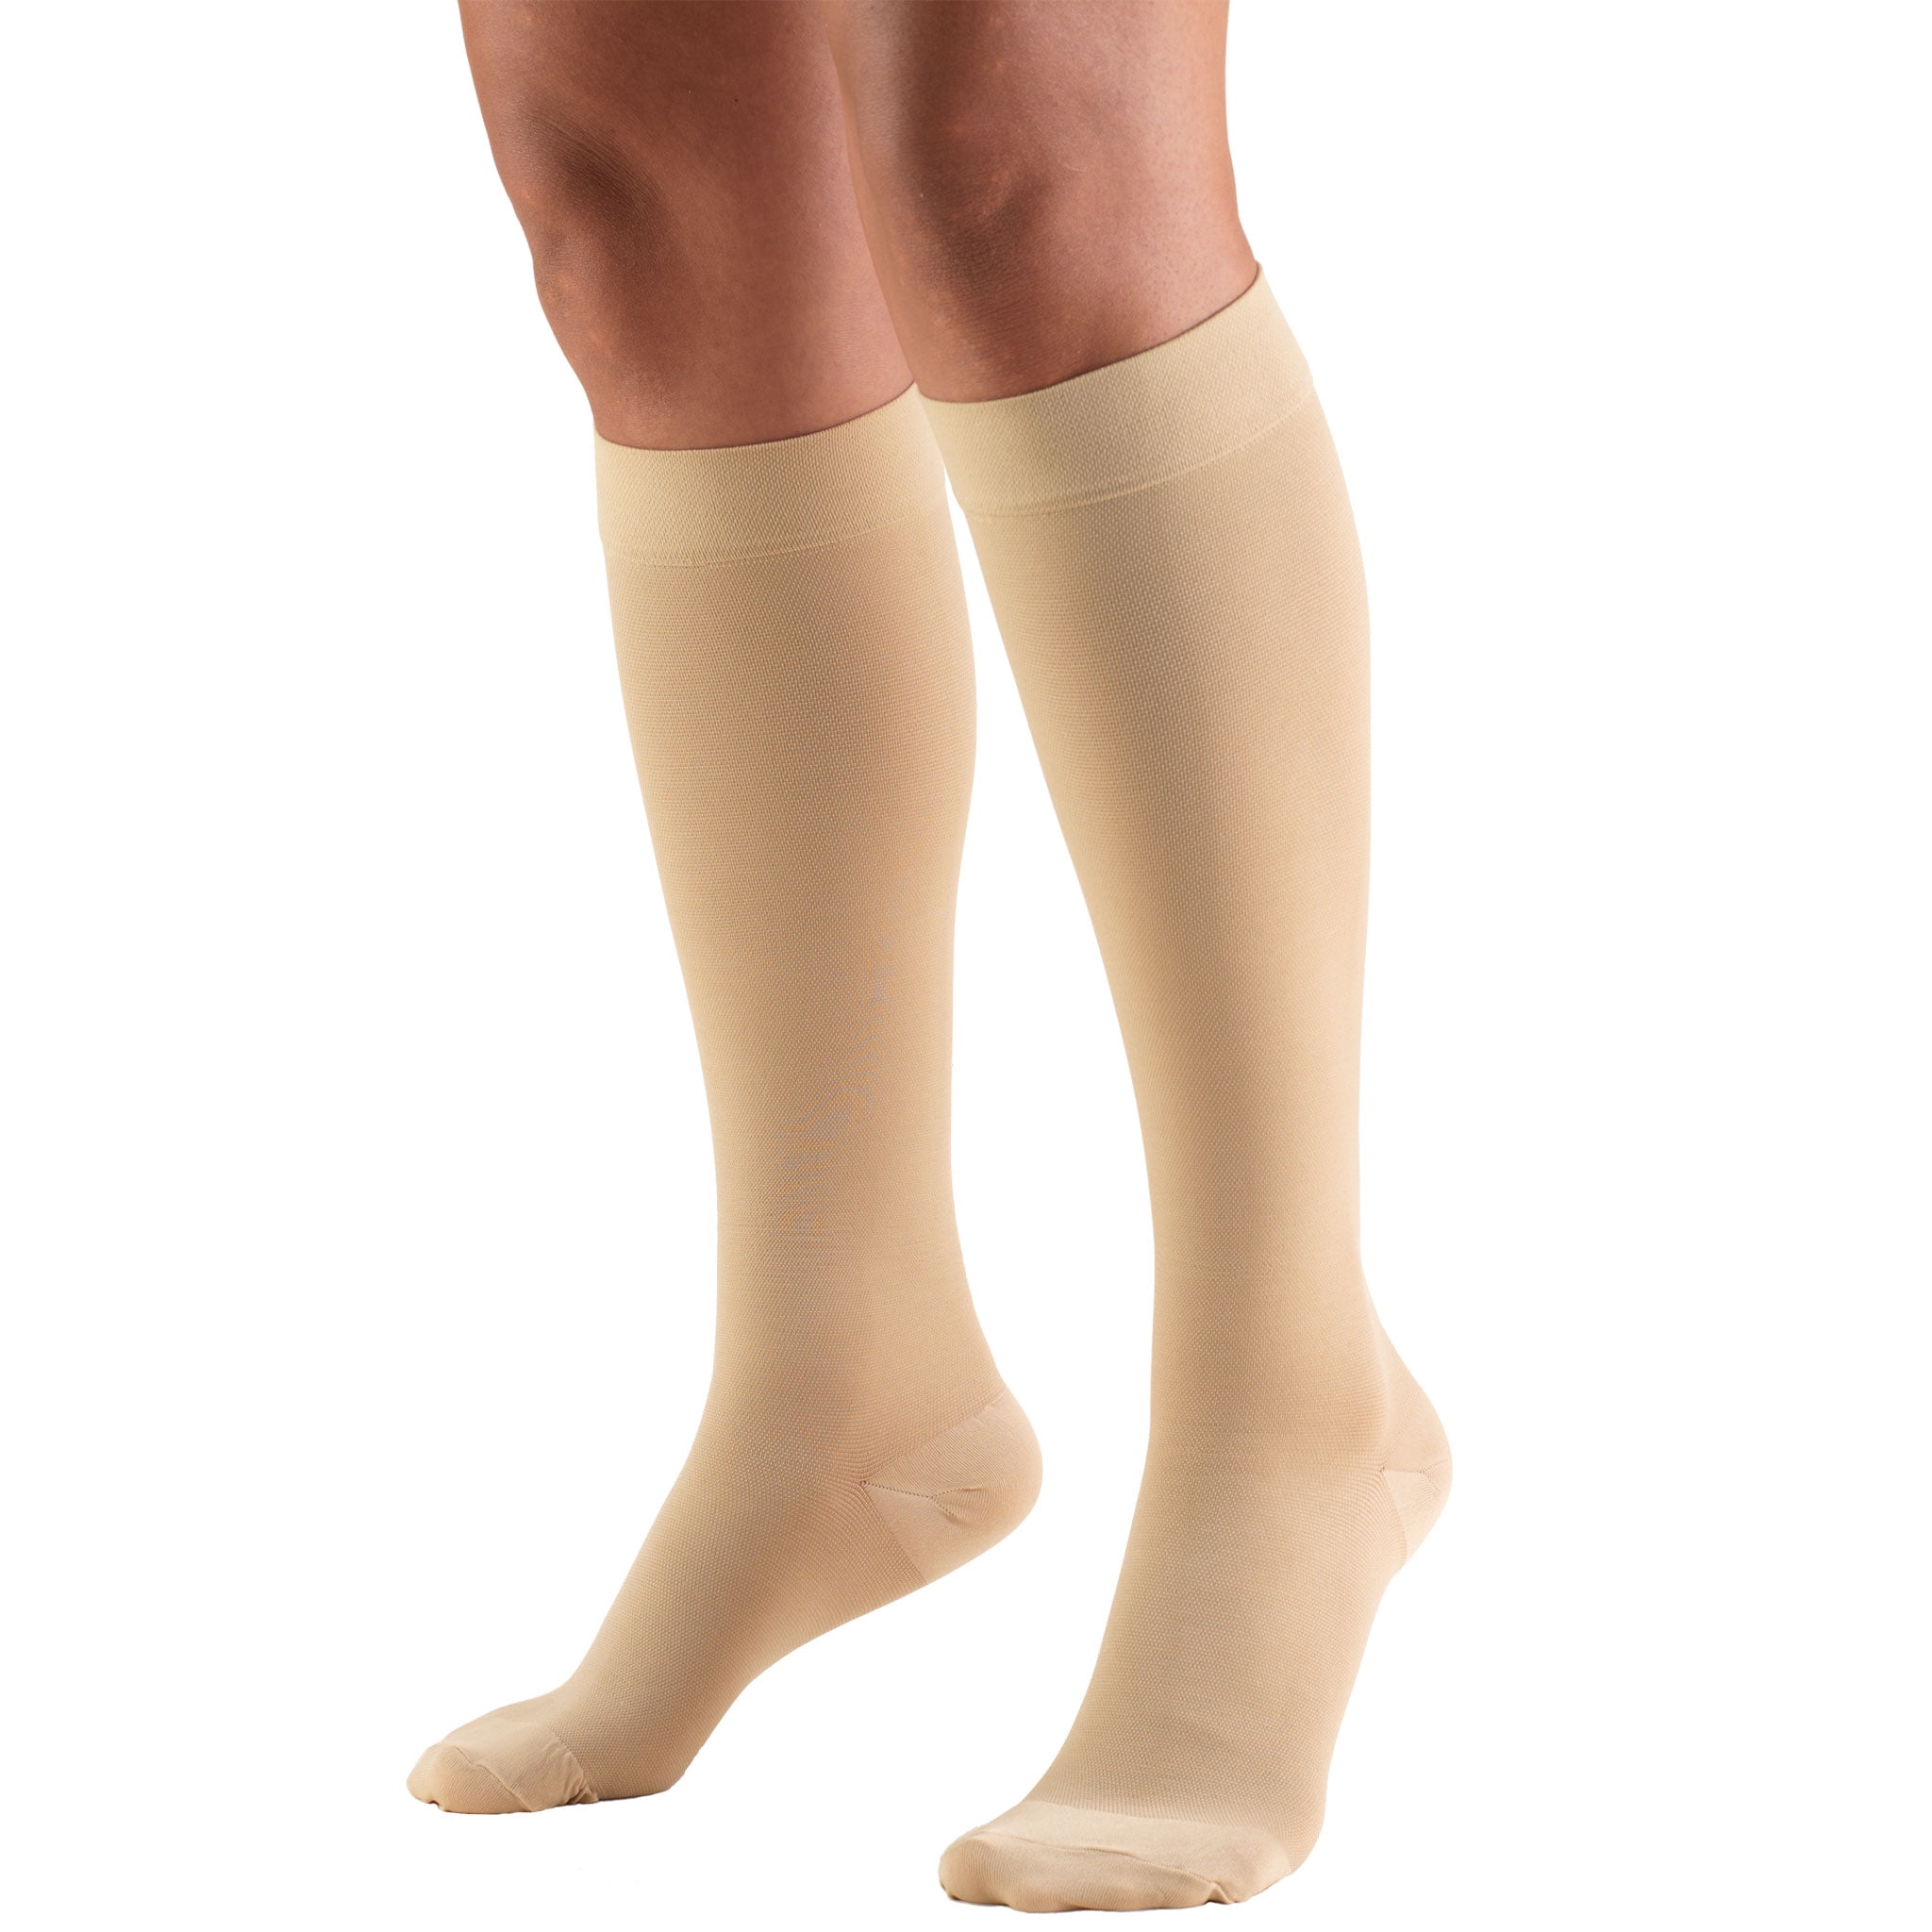 Doc Miller Thigh High Open Toe Compression Hose 20-30 mmHg Opaque Stockings